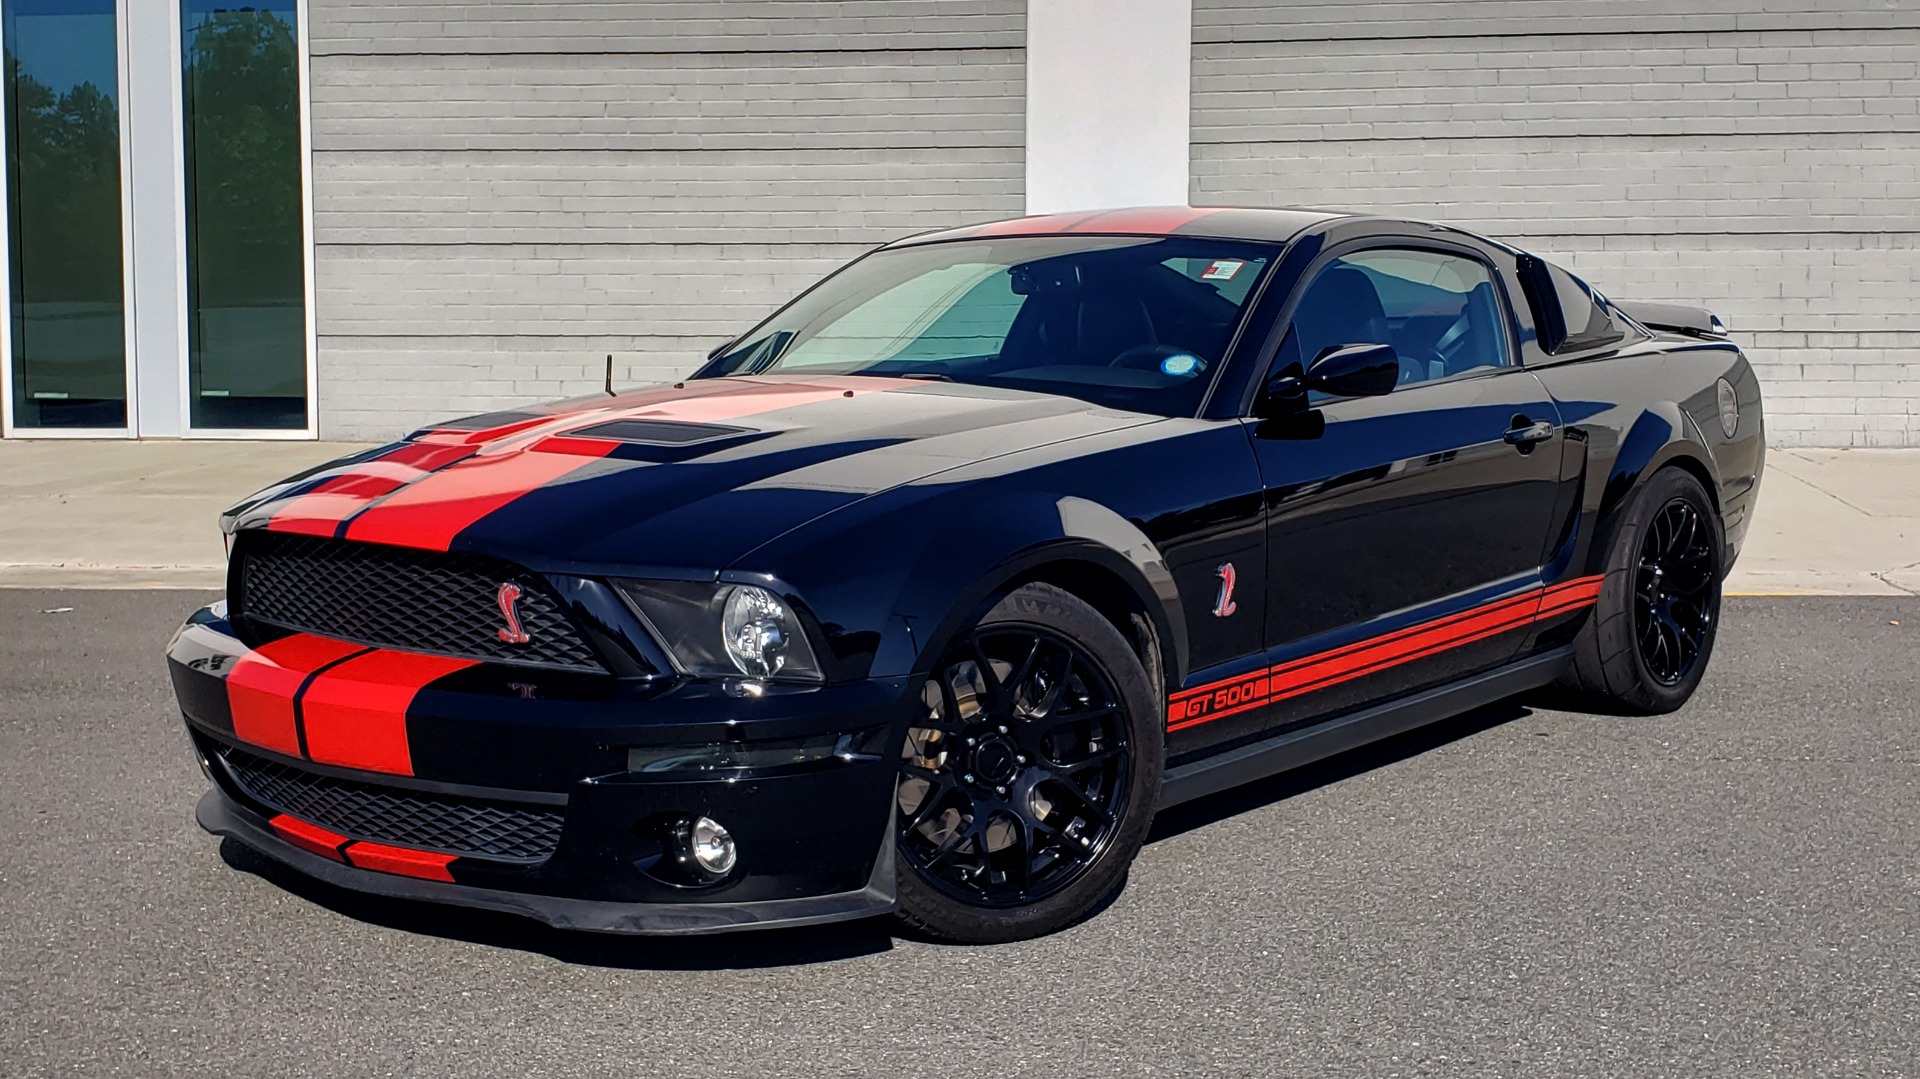 Used 2009 Ford MUSTANG SHELBY GT500 / RED SNAKE EDITION / UPGRADED 750RWHP / NAV / SHAKER SND for sale Sold at Formula Imports in Charlotte NC 28227 1